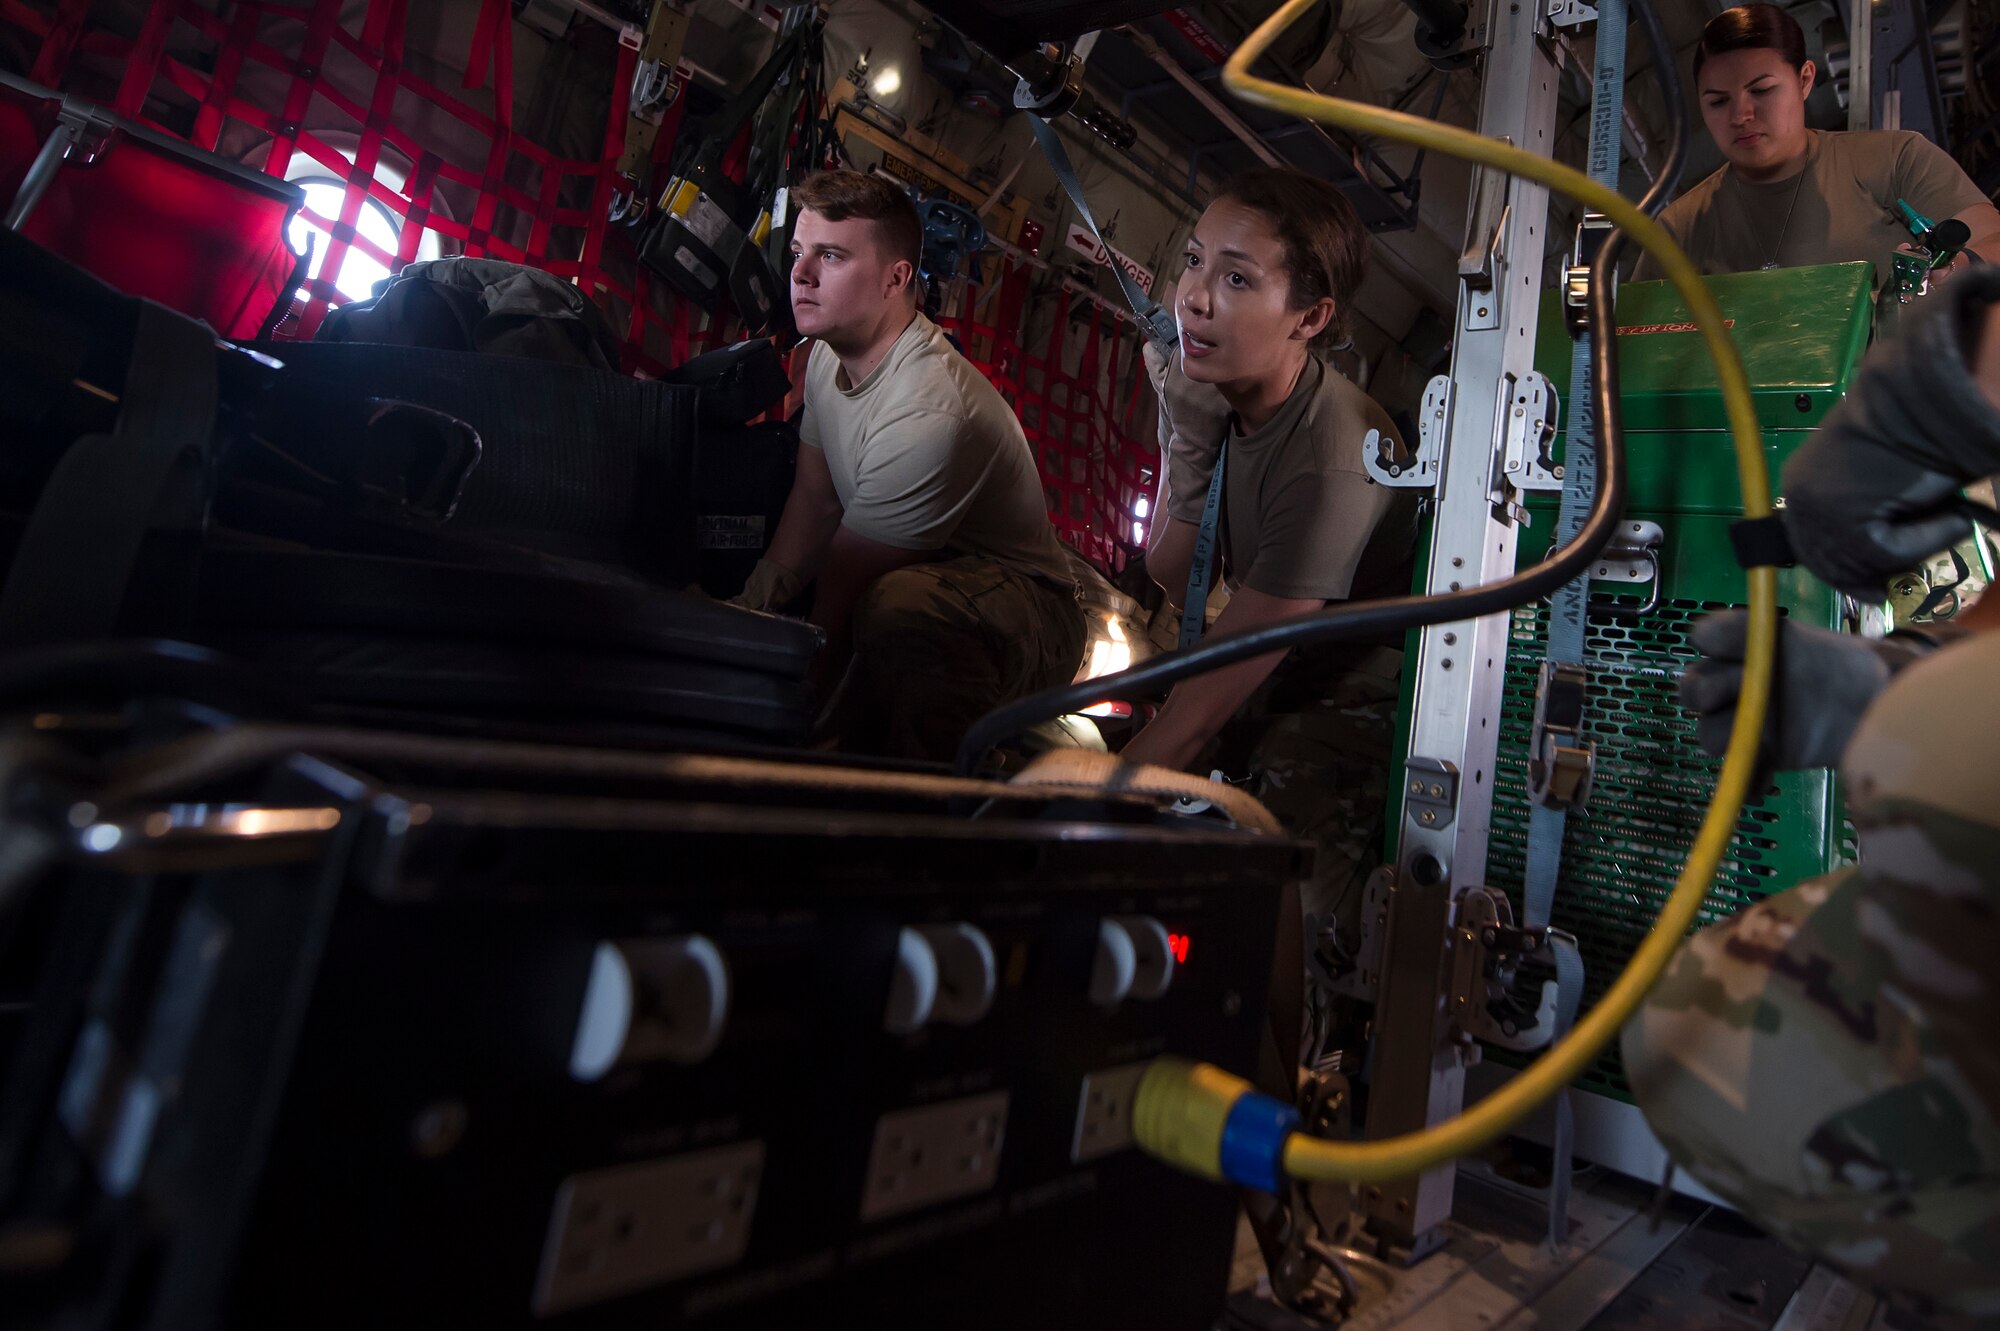 From left, Senior Airman Robert McCabe, 379th Expeditionary Aeromedical Evacuation Squadron (EAES) aeromedical evacuation technician, and Capt. Aline Putnam, 379th EAES flight nurse, fasten a litter and medical equipment into place on a C-130 Hercules at Al Udeid Air Base, Qatar, before a recent aeromedical evacuation mission.